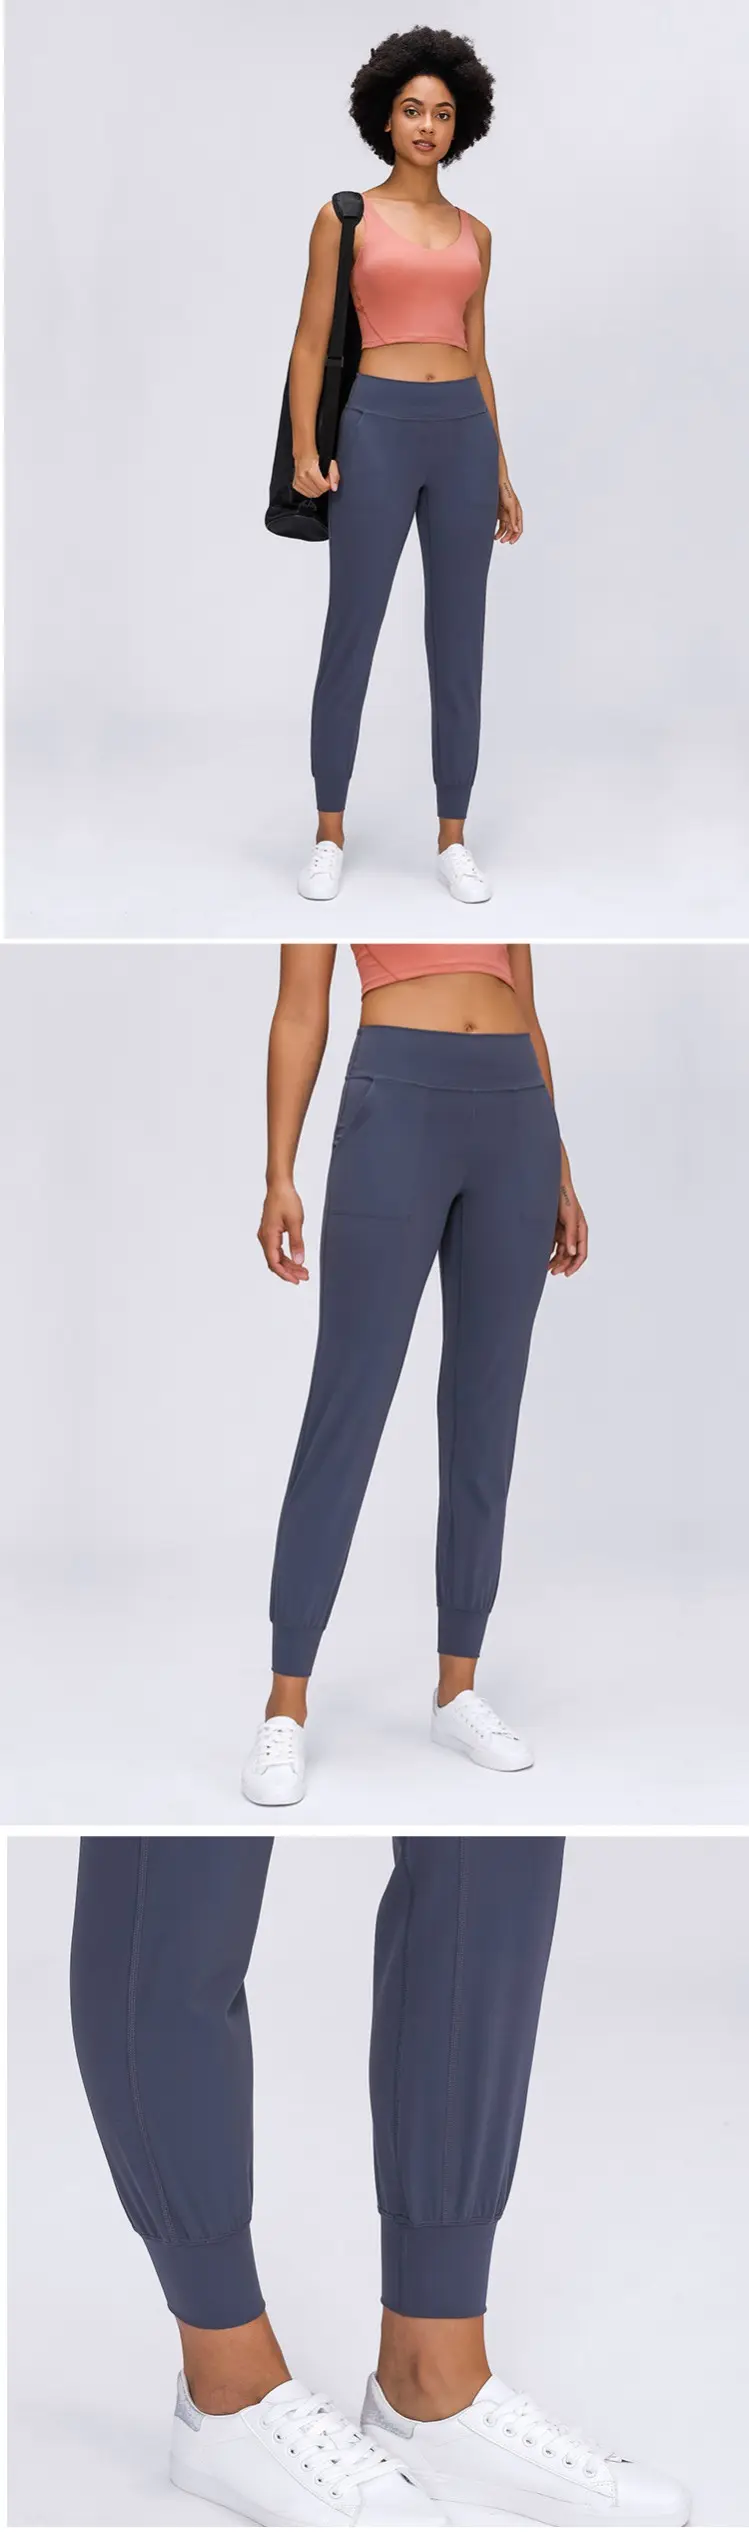 Lululemon Align Quick Drying Exercise Jogger Fitness Cropped Loose Comfortable Straight Workout Running Yoga Pants